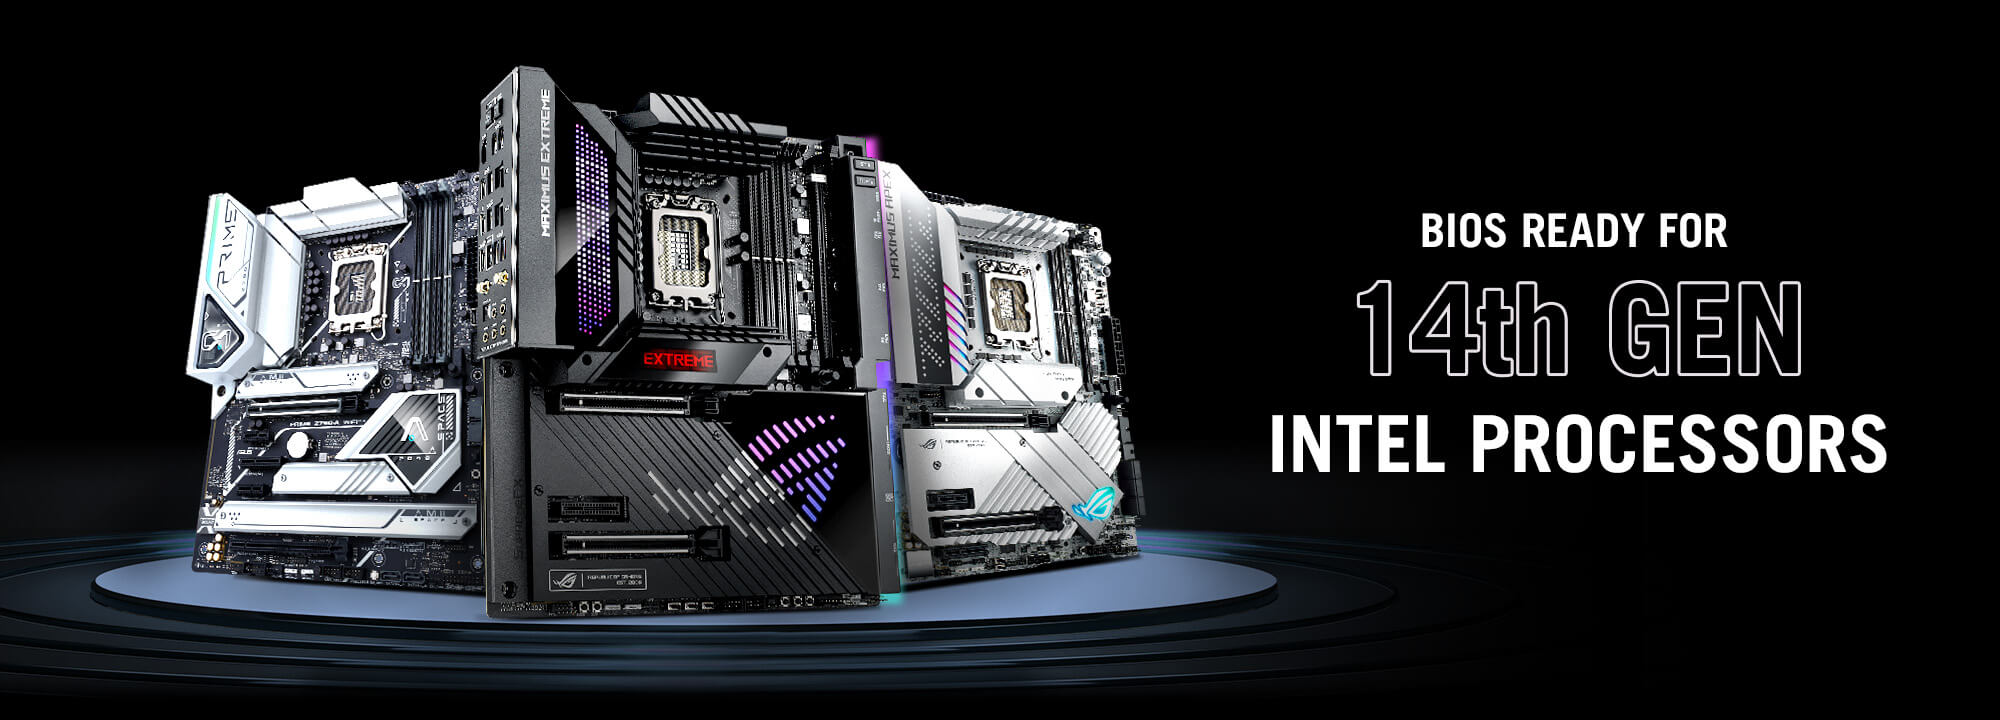 Three Z790 motherboards image with BIOS Ready for next-gen Intel Processors